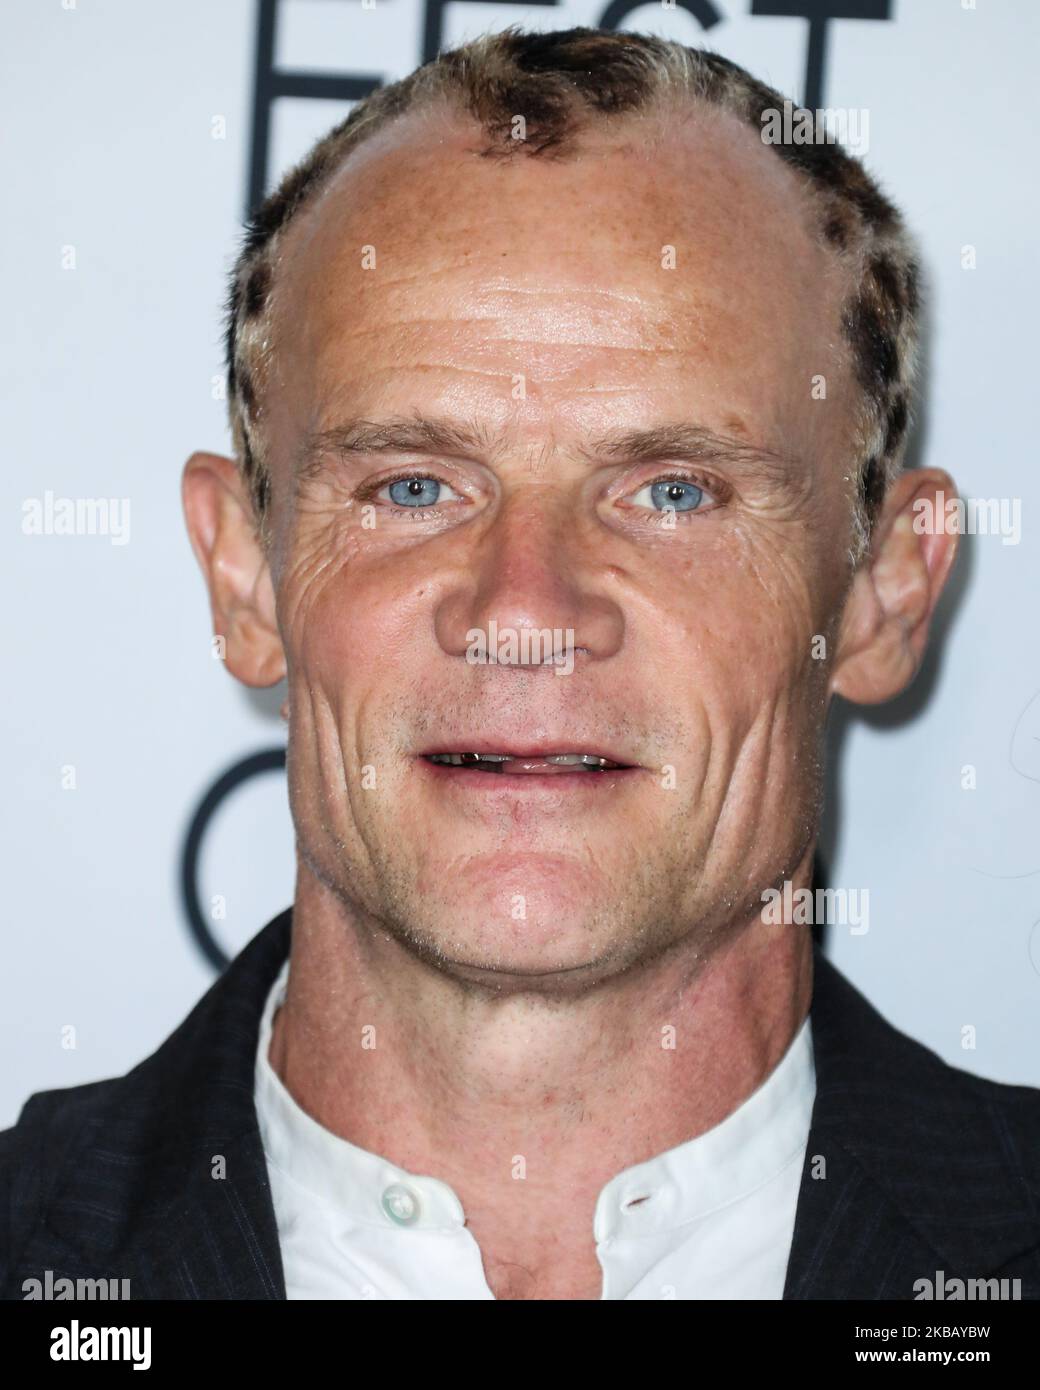 HOLLYWOOD, LOS ANGELES, CALIFORNIA, USA - NOVEMBER 14: Flea arrives at the AFI FEST 2019 - Opening Night Gala - Premiere Of Universal Pictures' 'Queen And Slim' held at the TCL Chinese Theatre IMAX on November 14, 2019 in Hollywood, Los Angeles, California, United States. (Photo by Xavier Collin/Image Press Agency/NurPhoto) Stock Photo